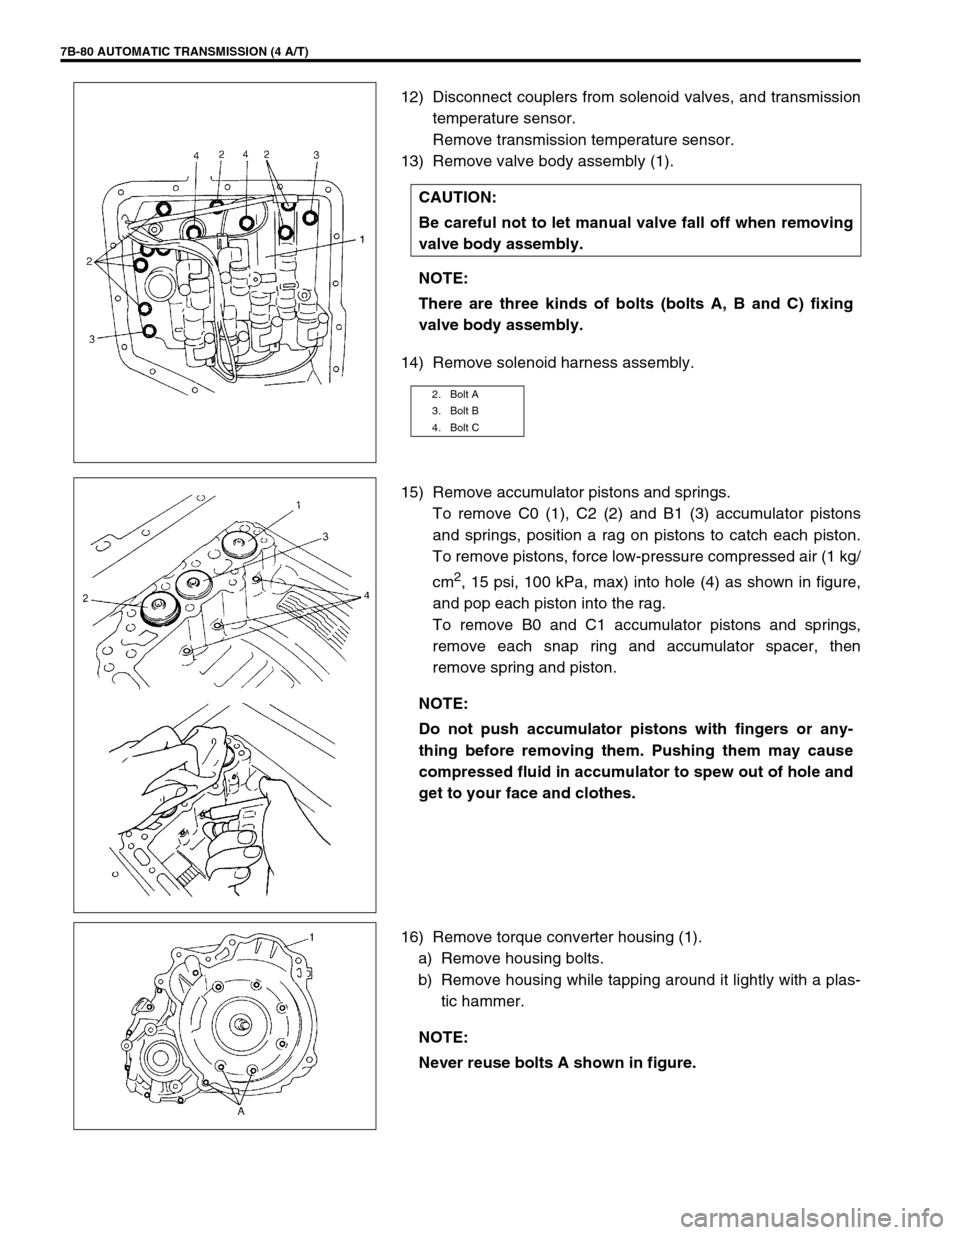 SUZUKI SWIFT 2000 1.G Transmission Service Workshop Manual 7B-80 AUTOMATIC TRANSMISSION (4 A/T)
12) Disconnect couplers from solenoid valves, and transmission
temperature sensor.
Remove transmission temperature sensor.
13) Remove valve body assembly (1).
14) 